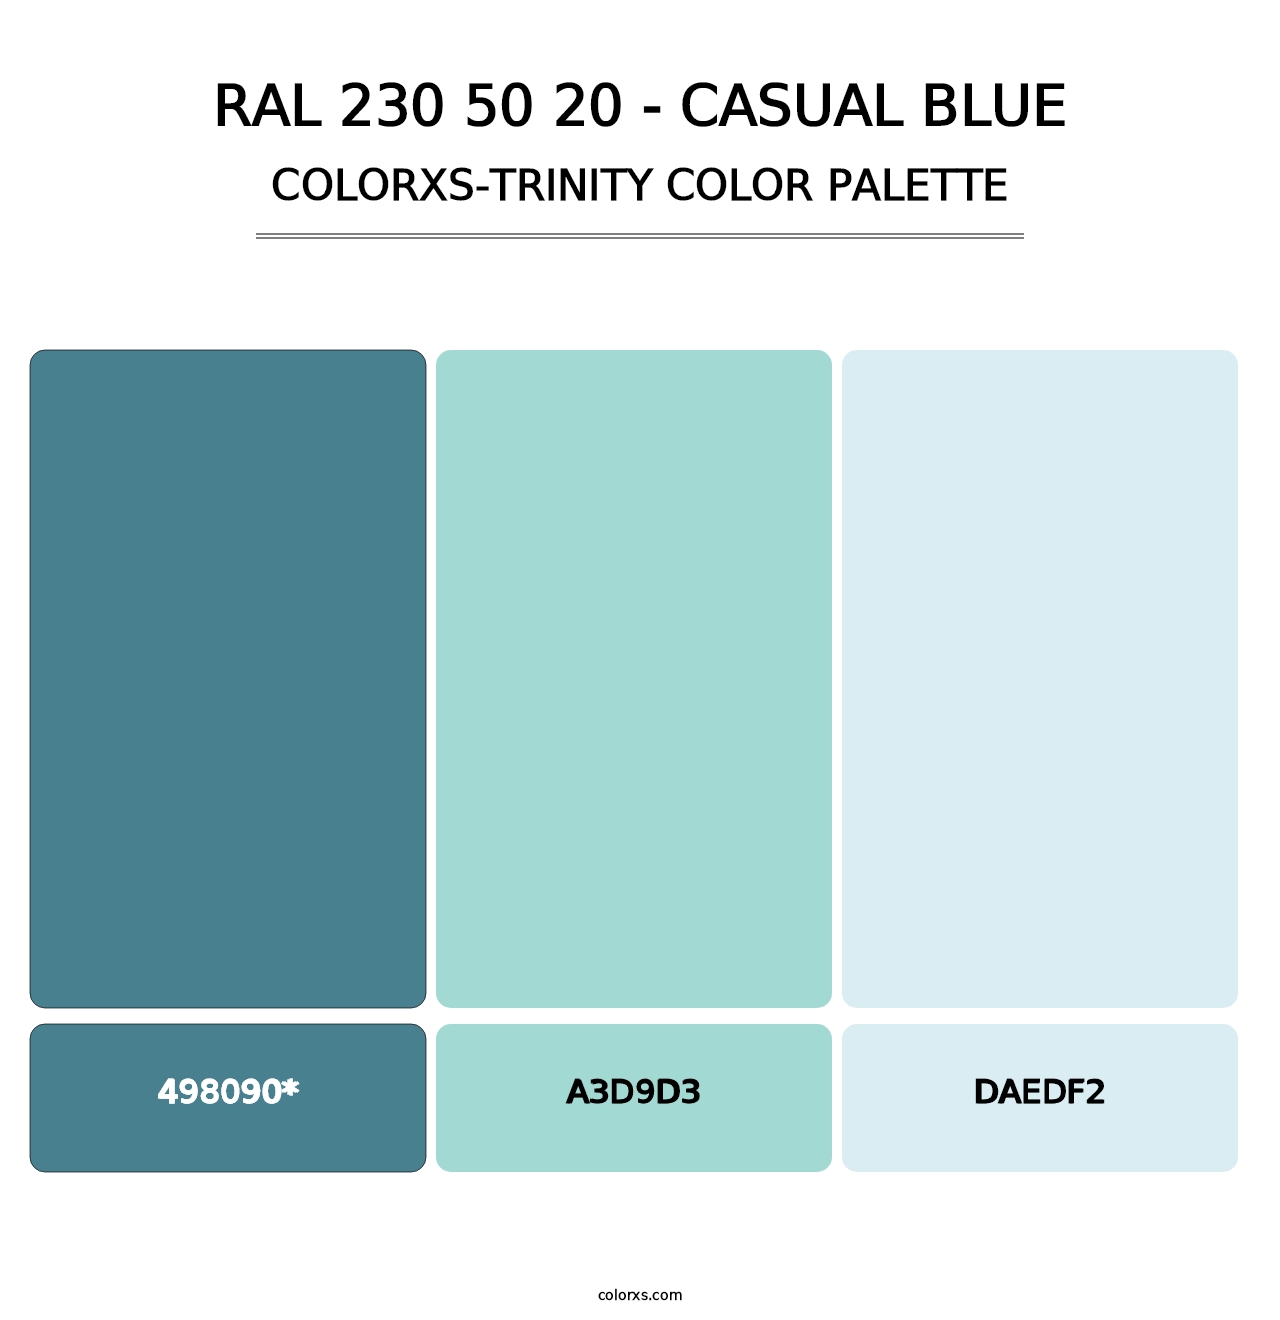 RAL 230 50 20 - Casual Blue - Colorxs Trinity Palette